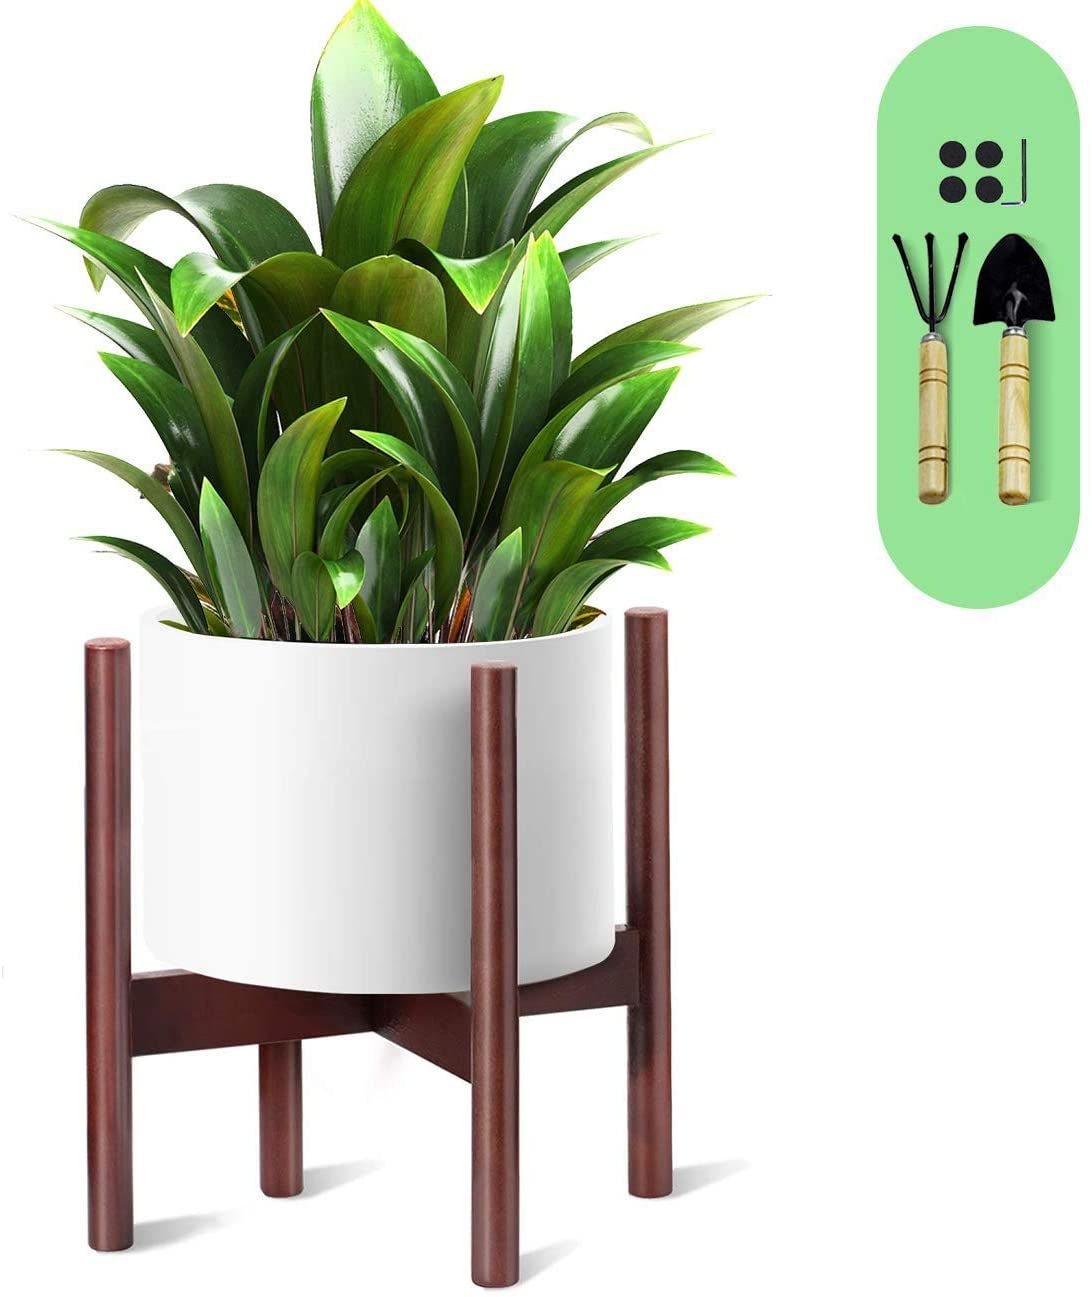 Plant Stand Wooden 10 Inch With 1 Trowel And 1 Rake Beech Wood Flower Stand  Pot Stand Plant Stand Holder Pot Not Included – Walmart In 10 Inch Plant Stands (View 2 of 15)